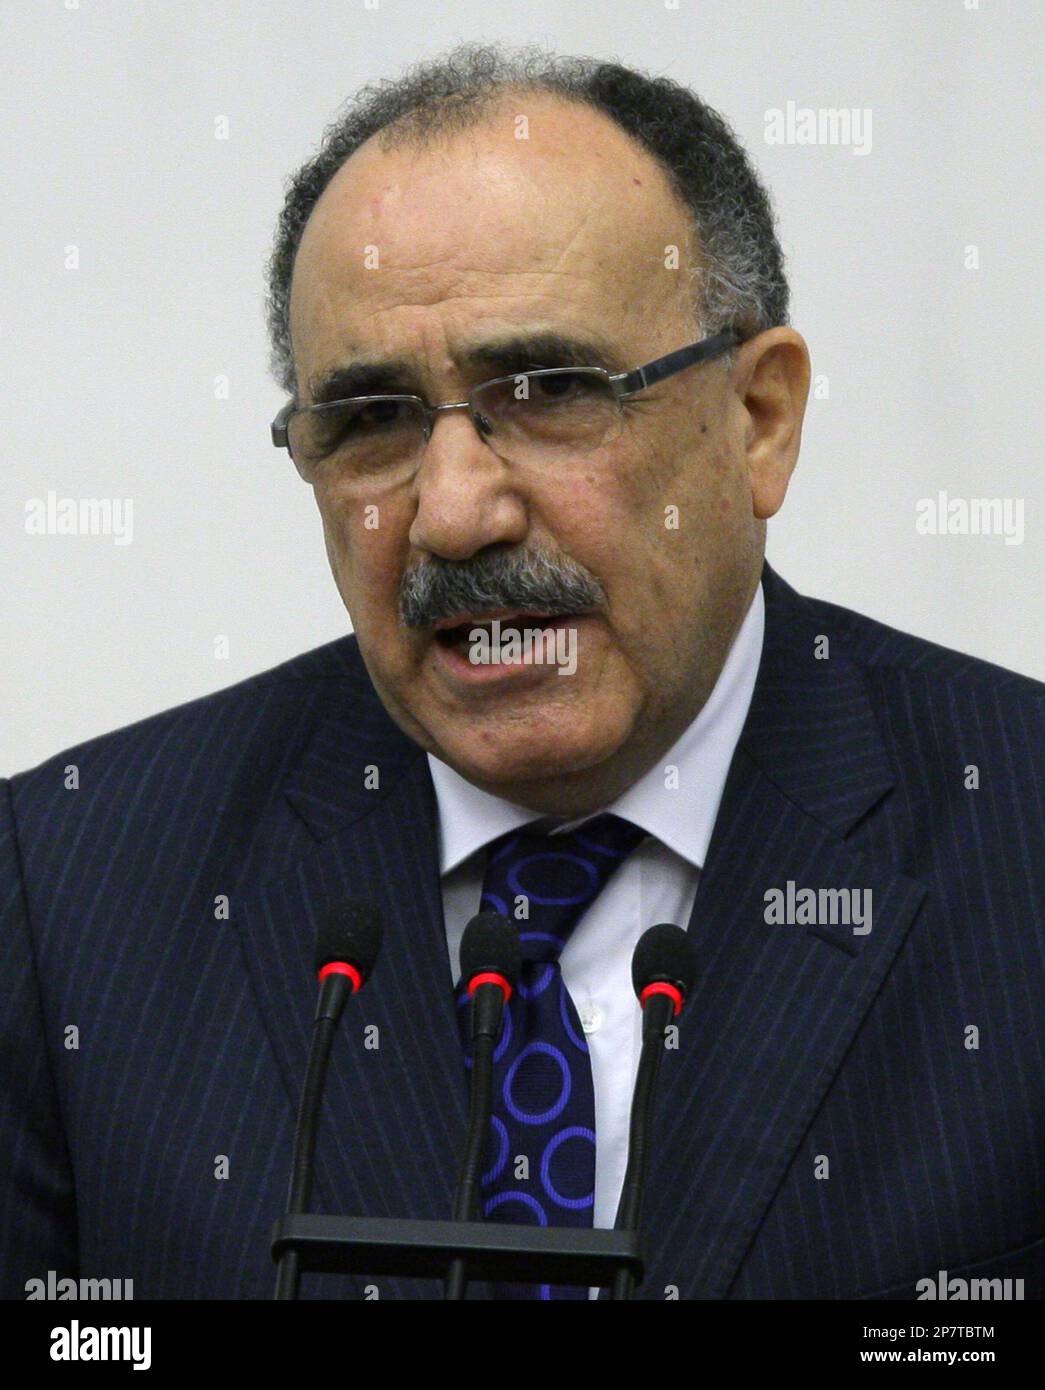 Turkey's Interior Minister Besir Atalay addresses the parliament during a debate on government's "Kurdish initiative" in Ankara, Turkey, Friday, Nov. 13, 2009. Turkish Parliament begun discussing the decades-long issue in a tense atmosphere. (AP Photo/Burhan Ozbilici) Stock Photo